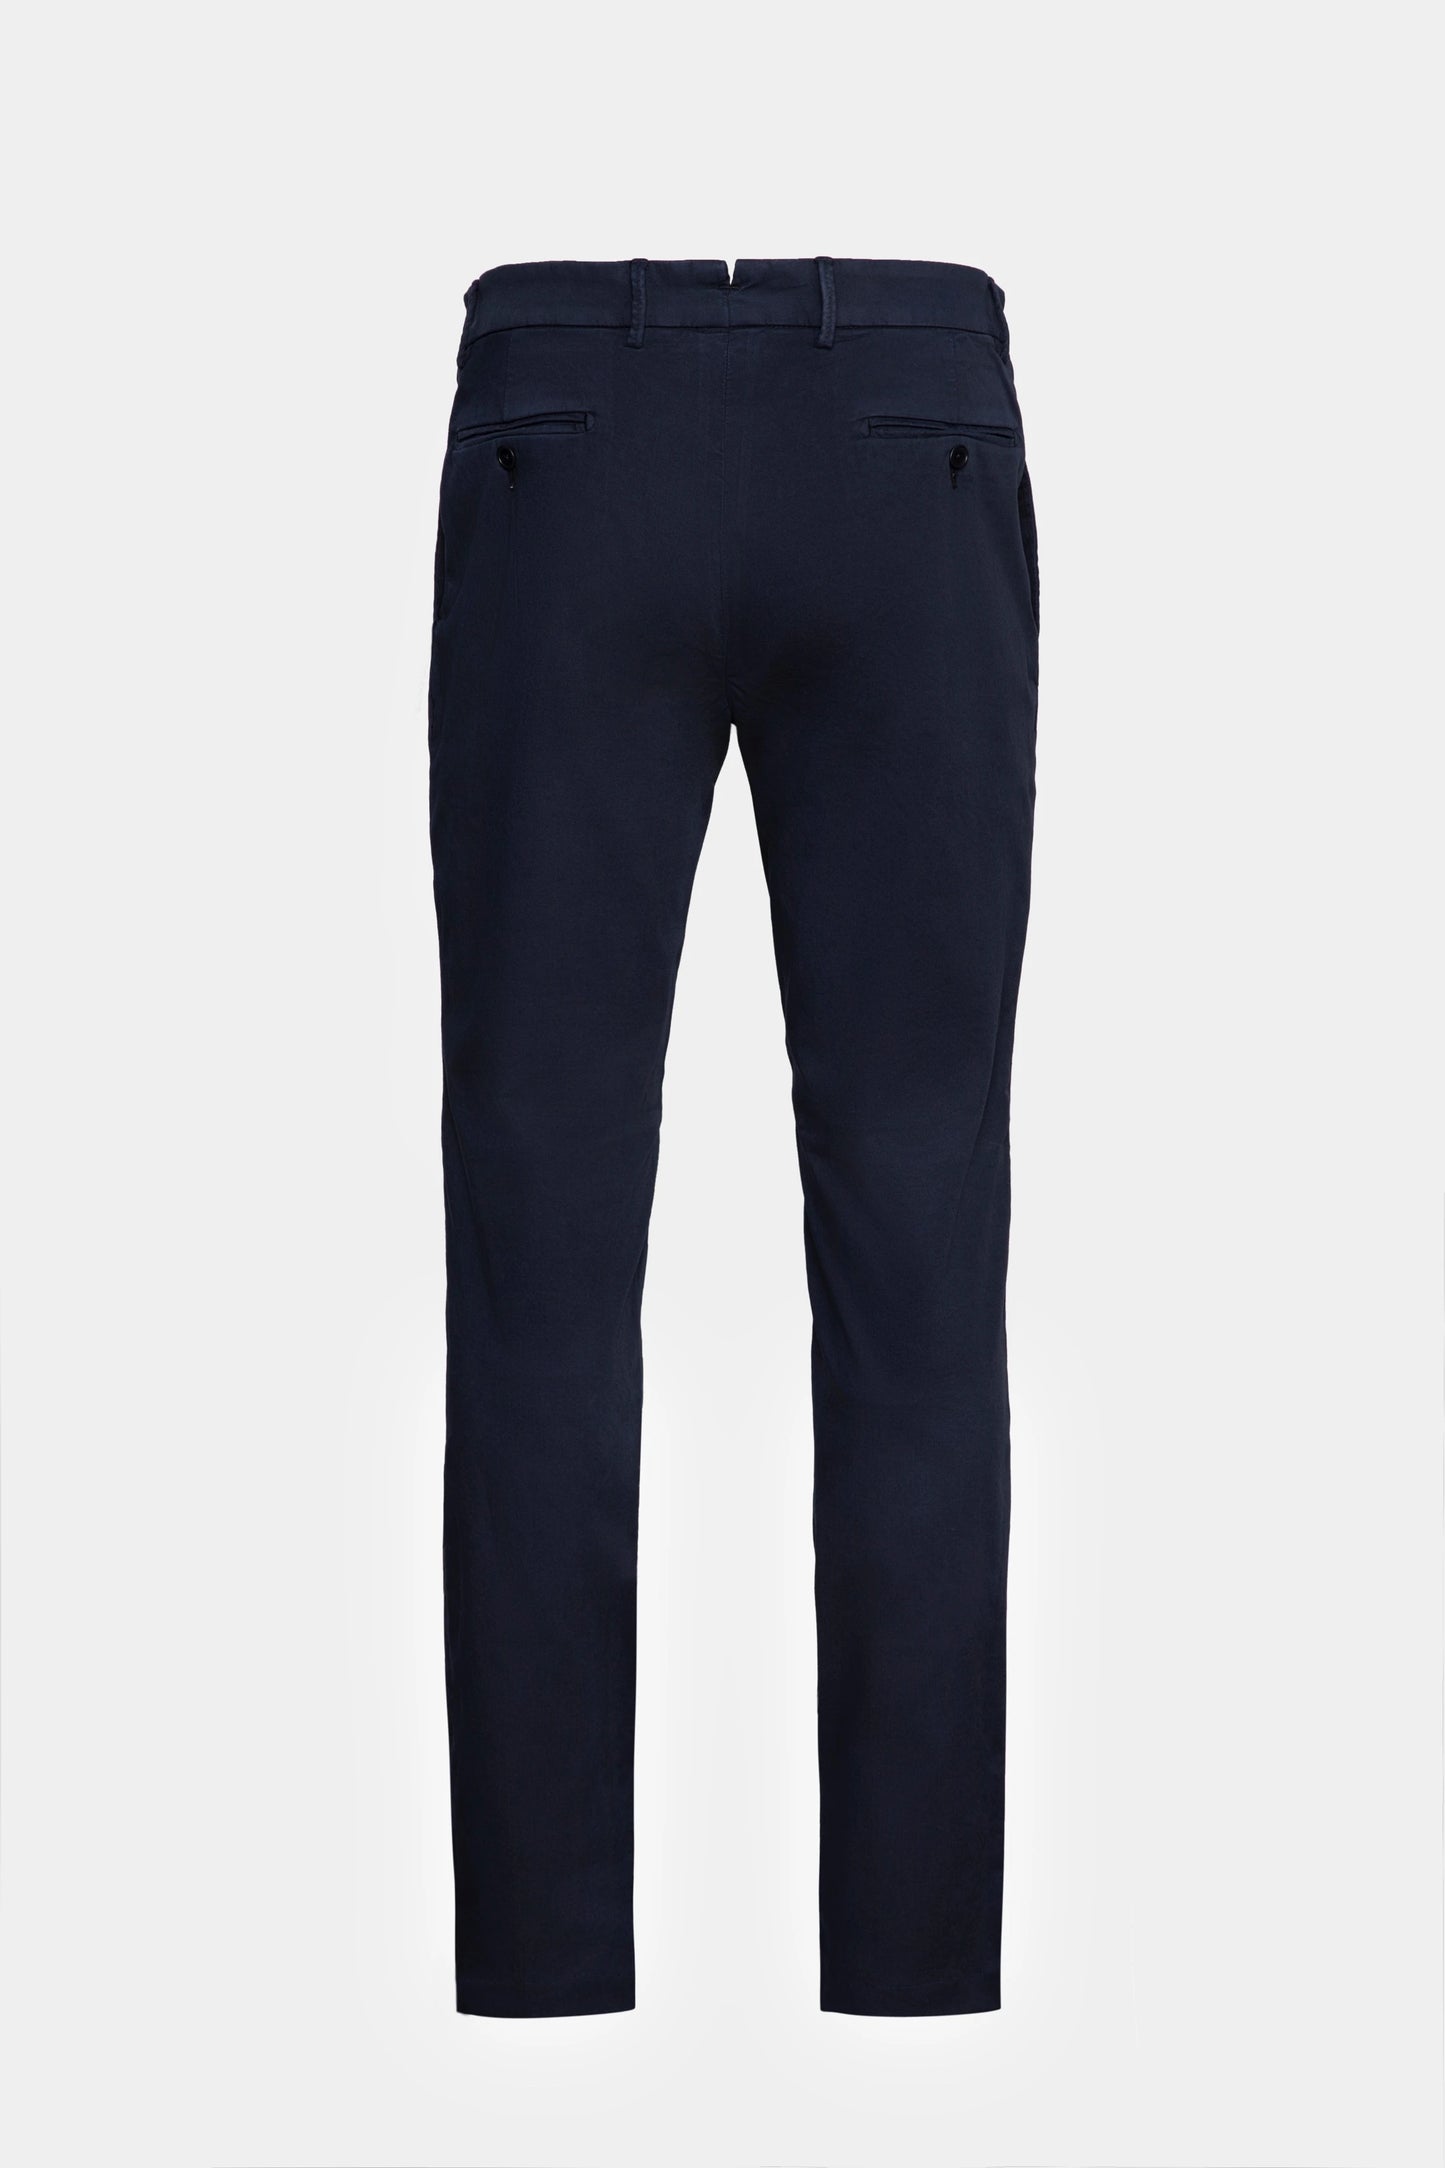 Navy Chino Trousers Menswear Casual Chinos